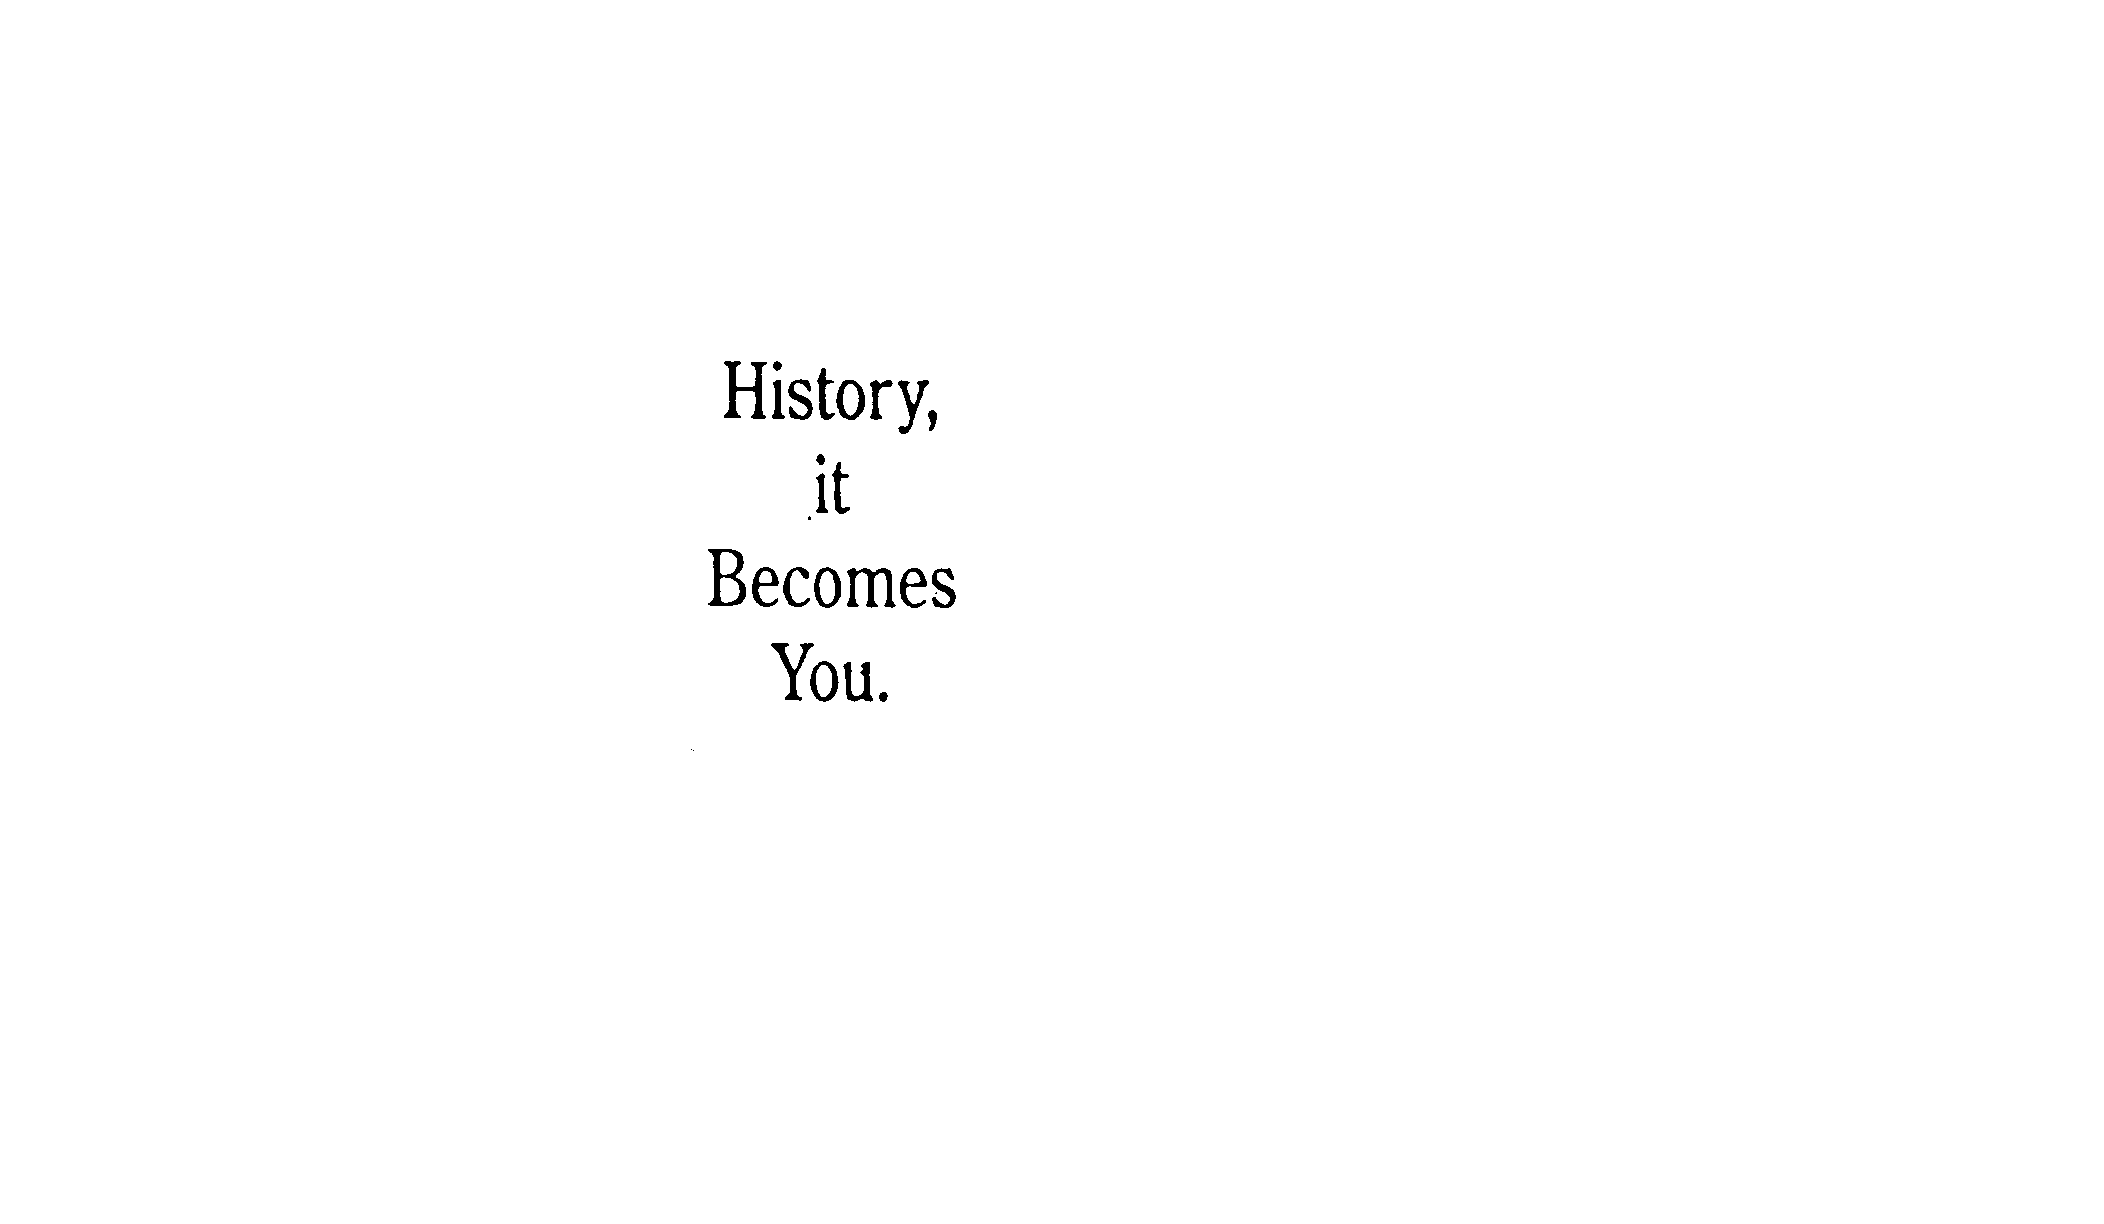 HISTORY, IT BECOMES YOU.